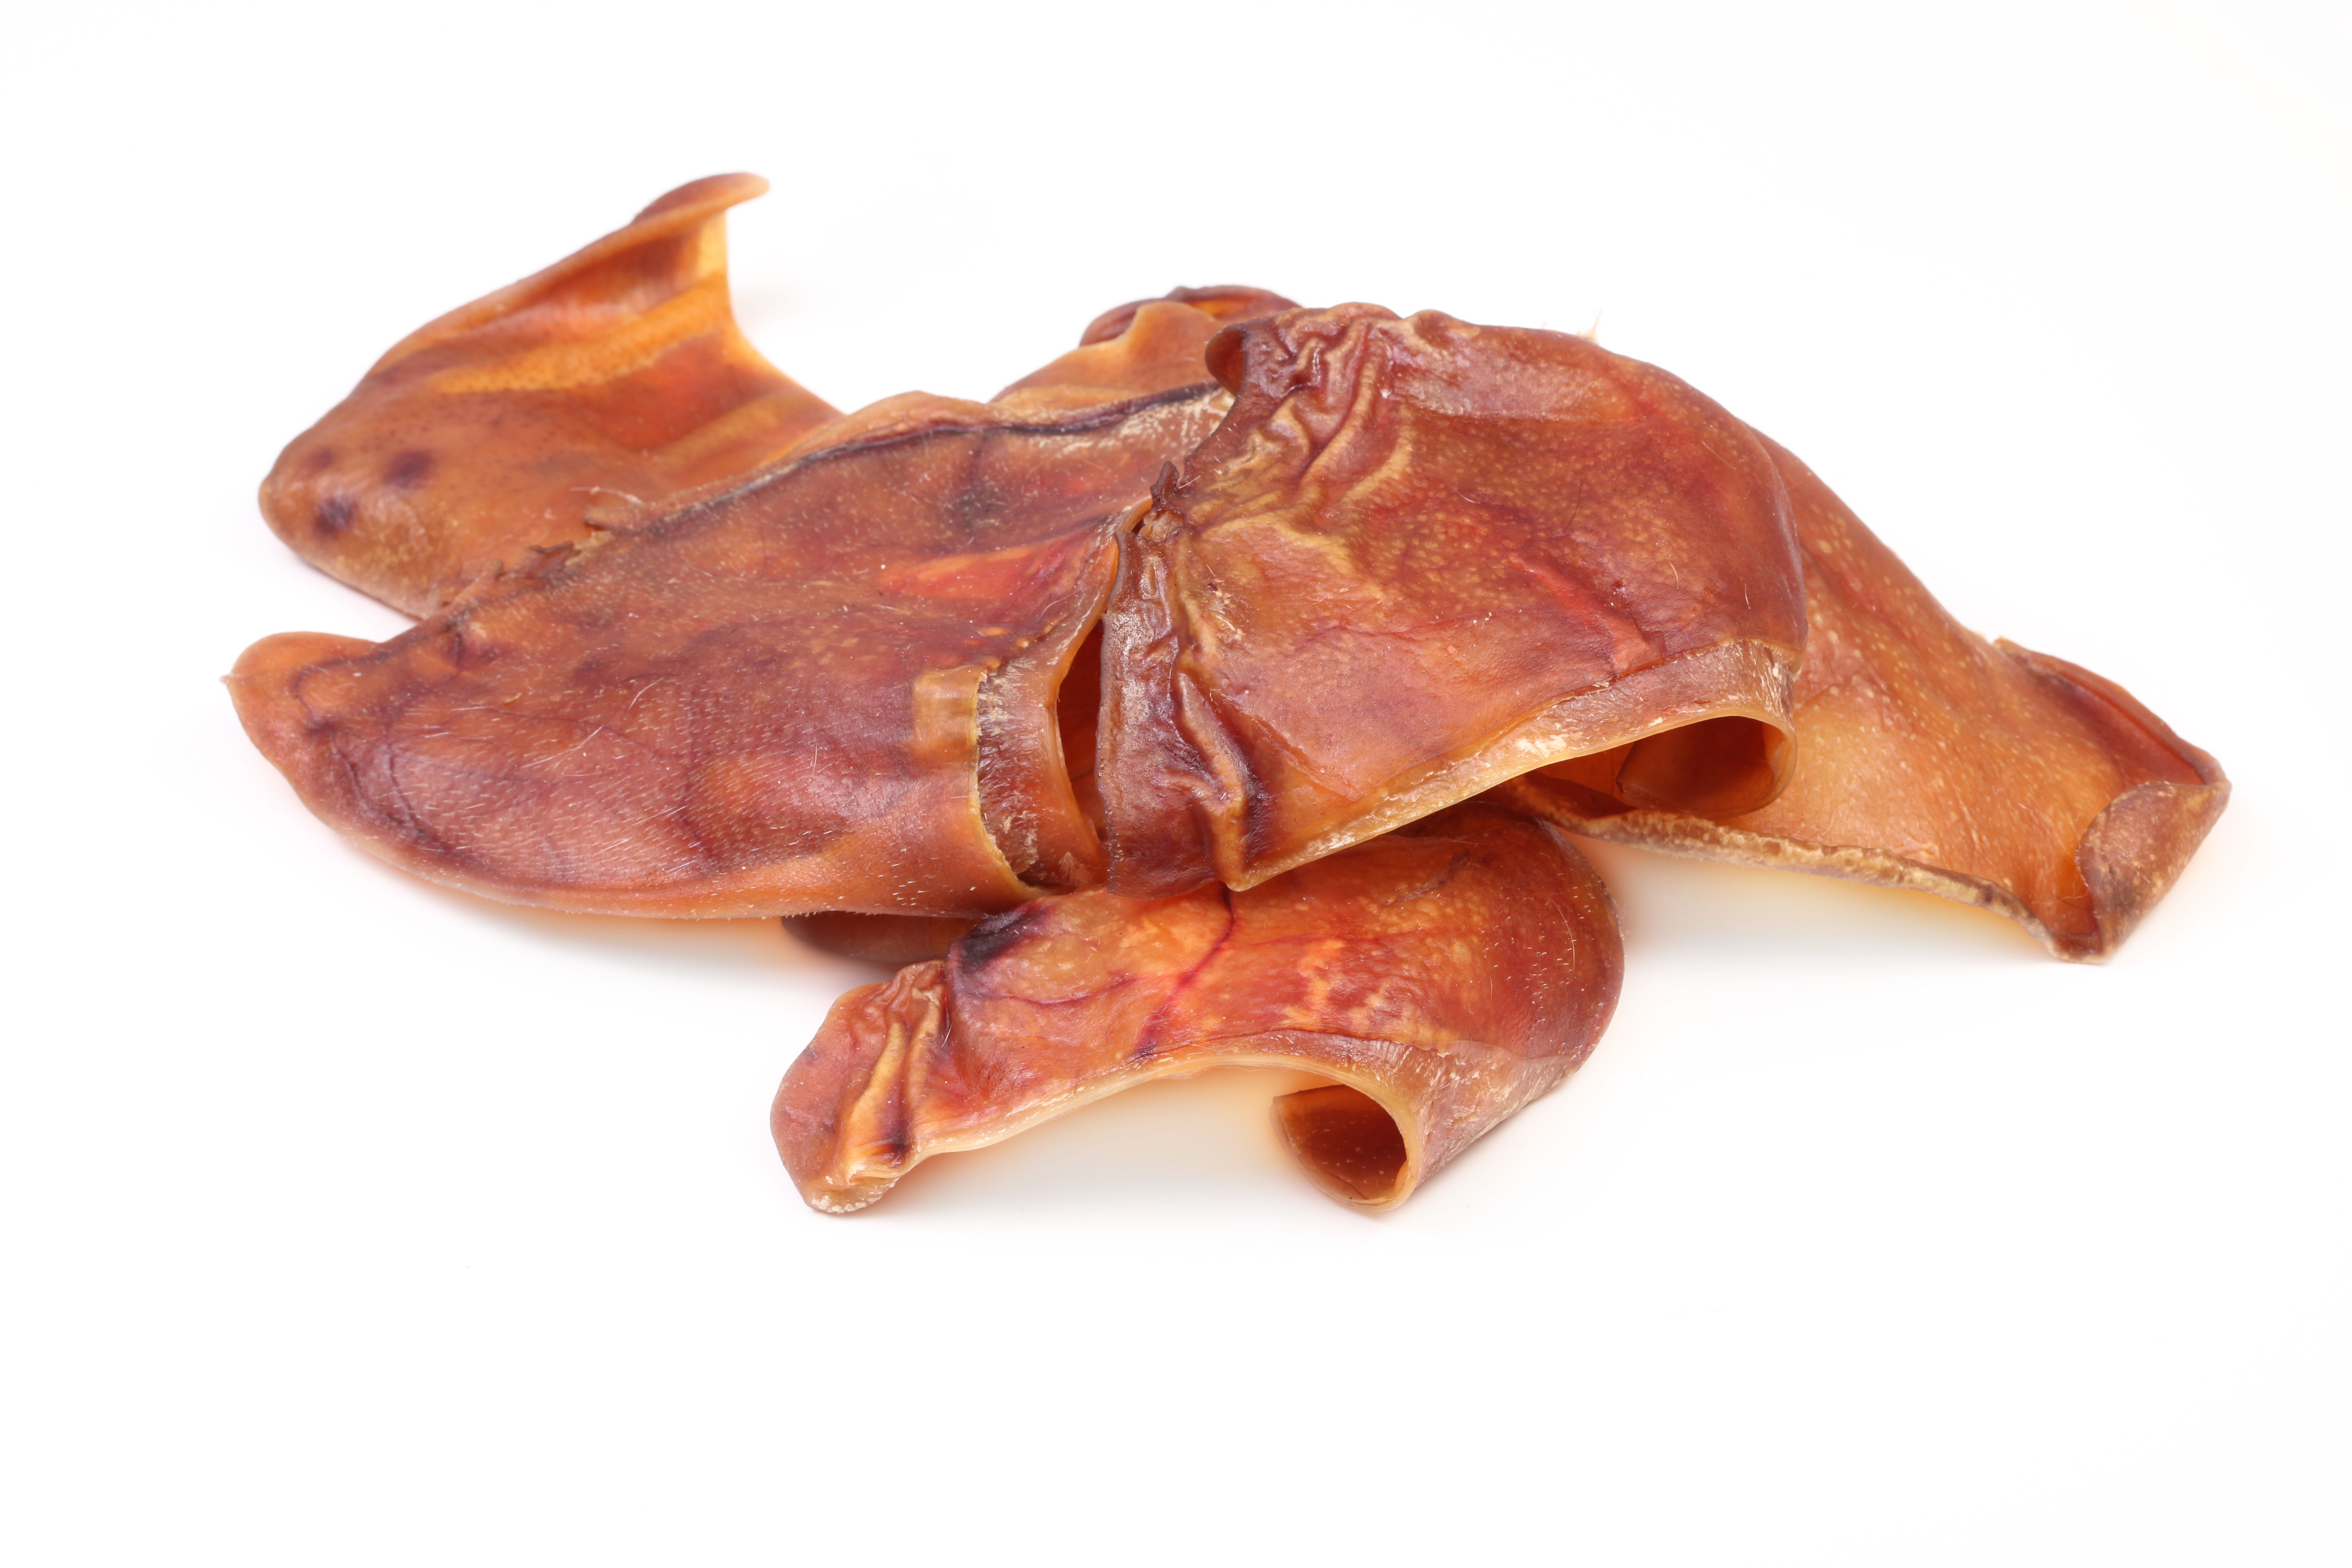 Pig ear dog treats recalled as FDA and CDC investigate salmonella outbreak